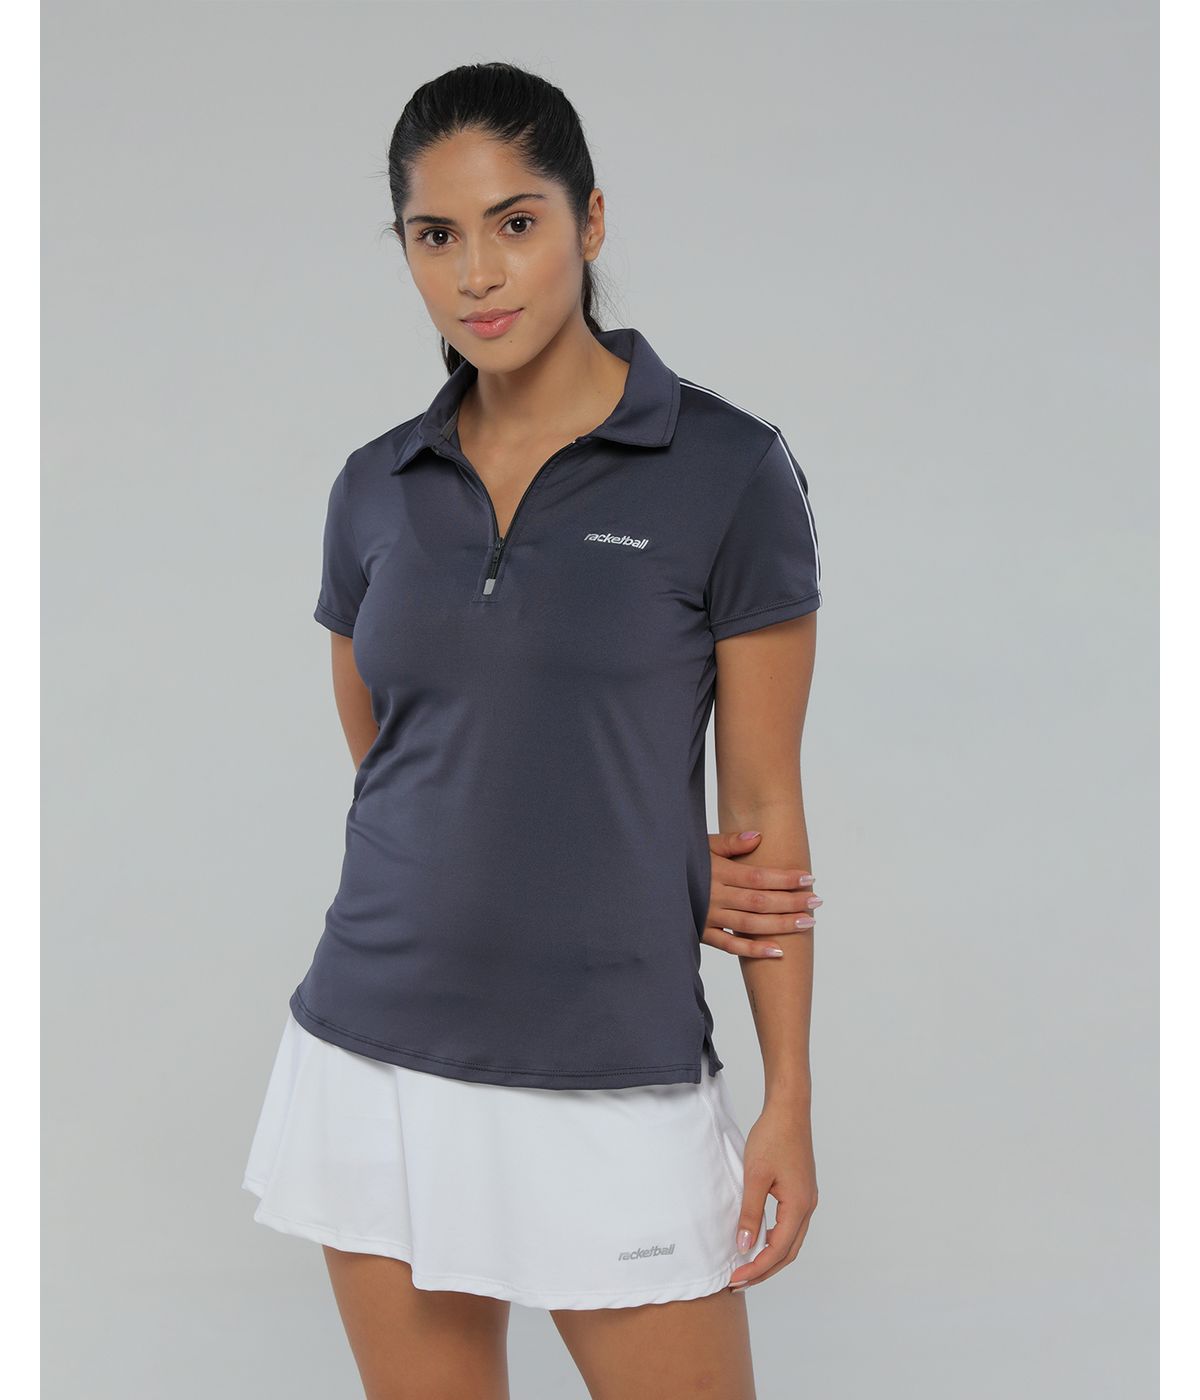 camiseta tipo polo mujer, color gris oscuro - racketball movil